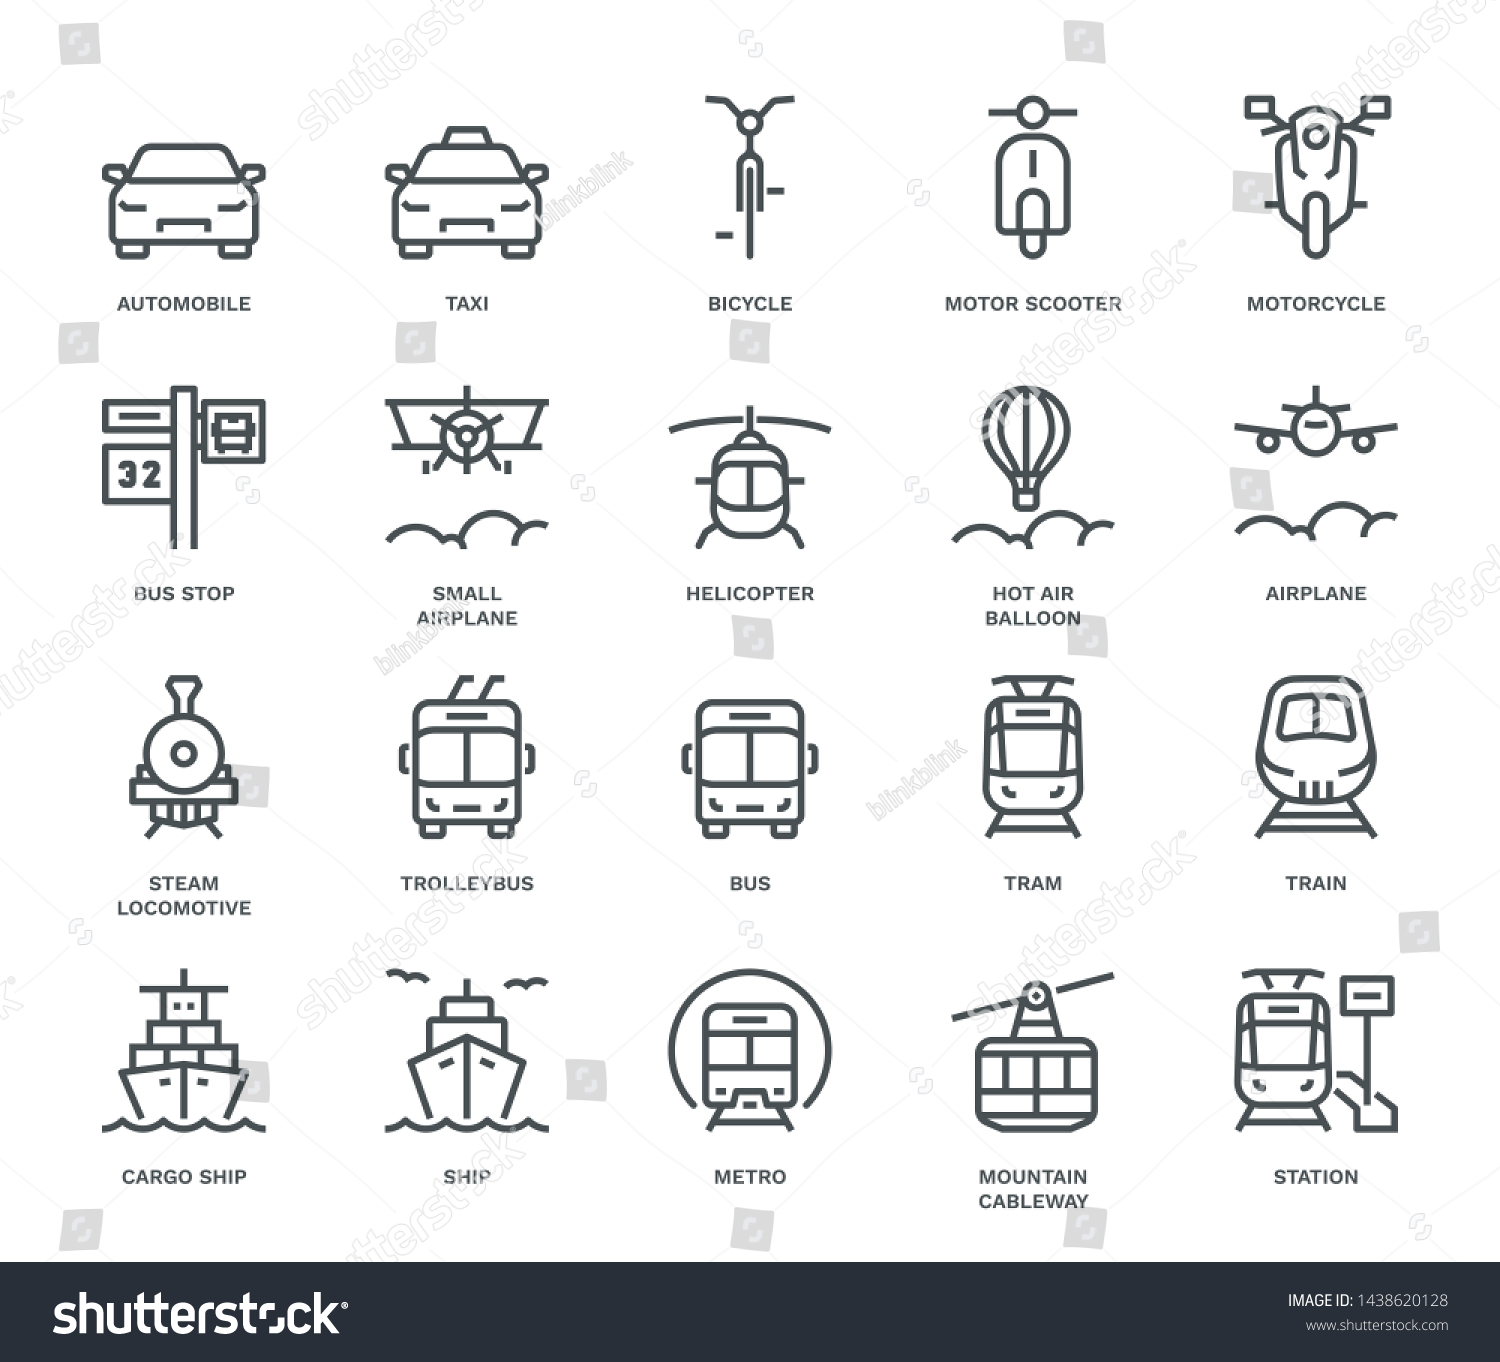 SVG of Public Transport Icons, oncoming/front view,  Monoline concept
The icons were created on a 48x48 pixel aligned, perfect grid providing a clean and crisp appearance. Adjustable stroke weight.  svg